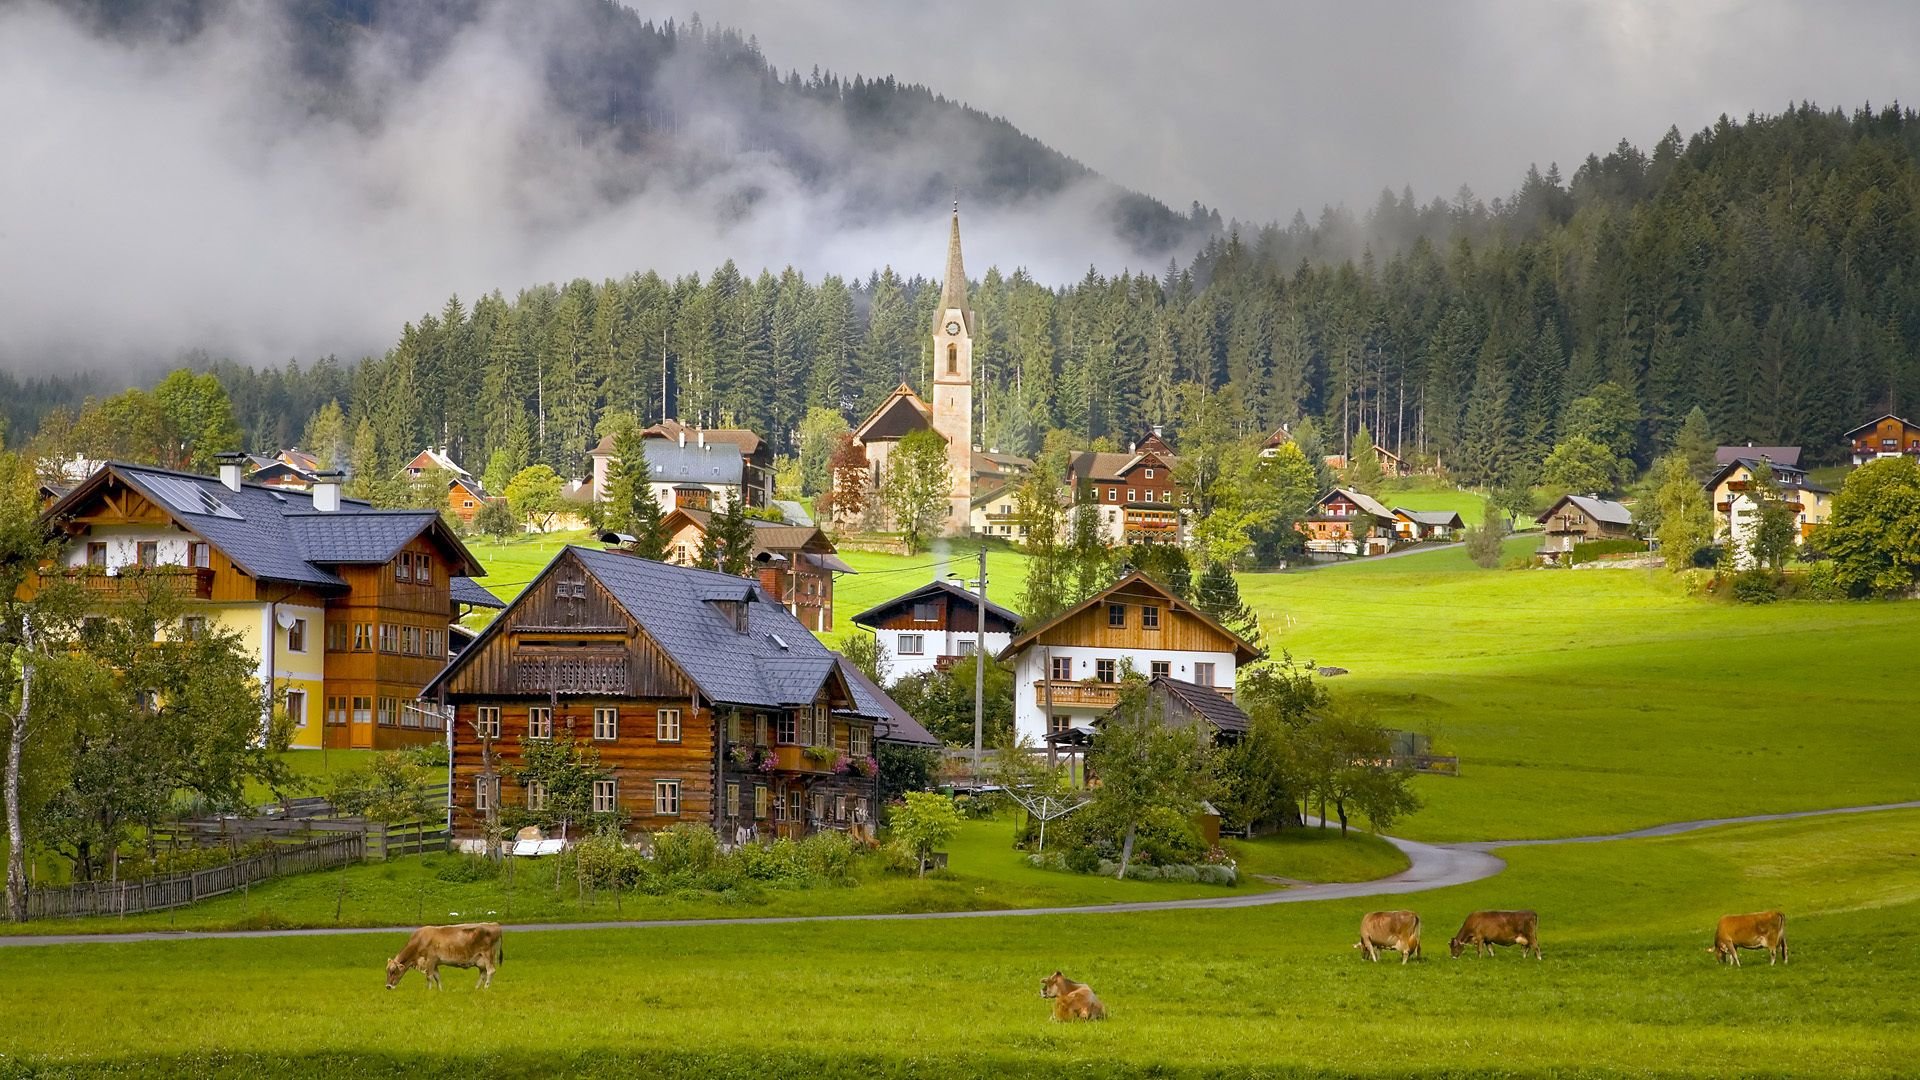 16 Of The Most Beautiful Villages Across The World To Add To Your Travel List